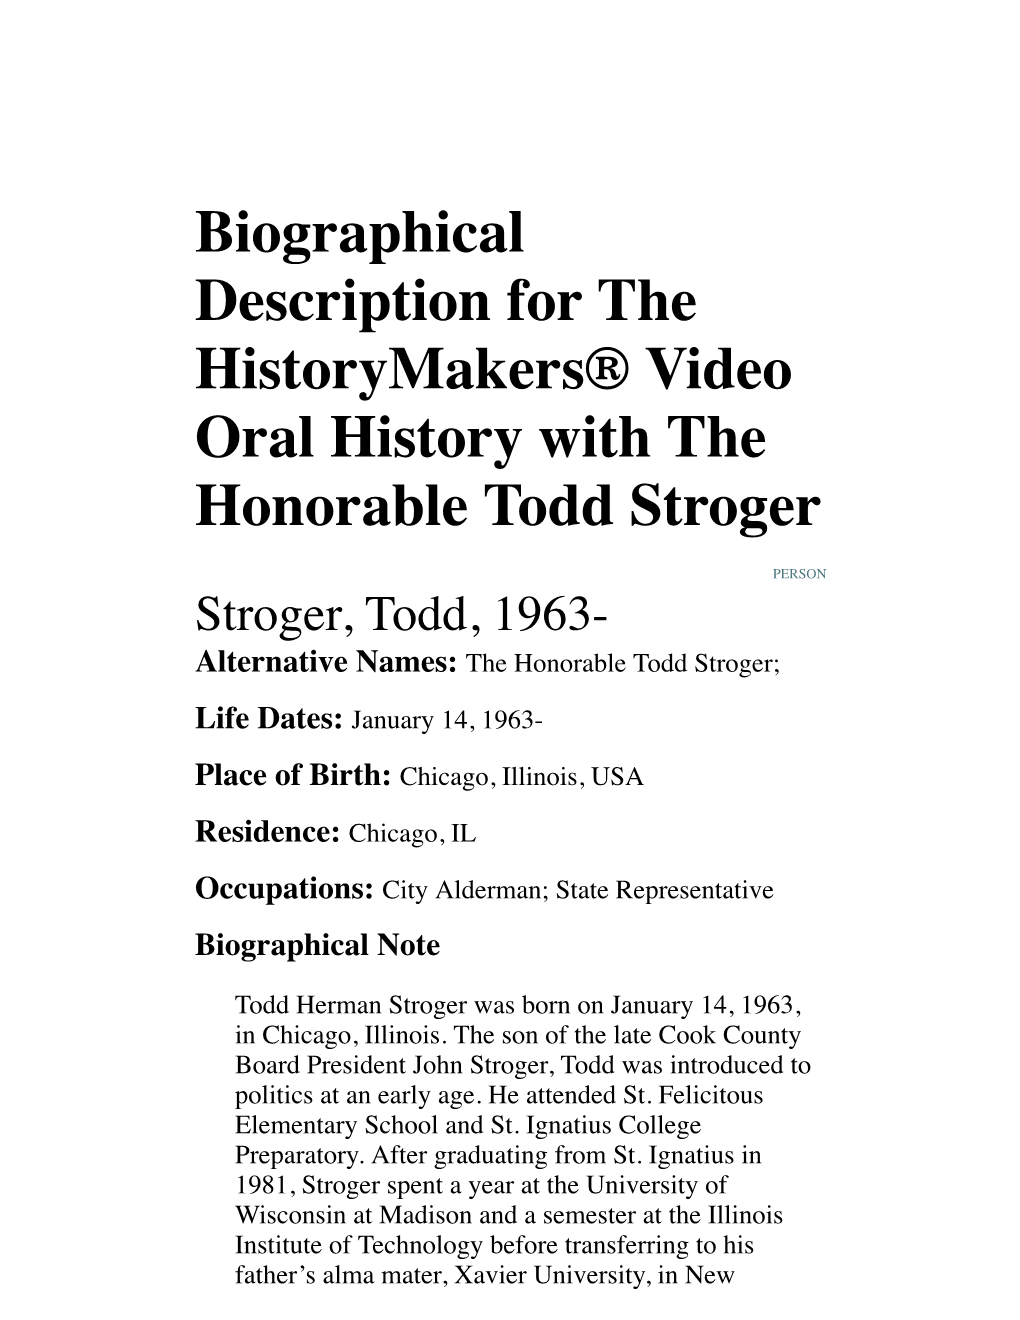 Biographical Description for the Historymakers® Video Oral History with the Honorable Todd Stroger